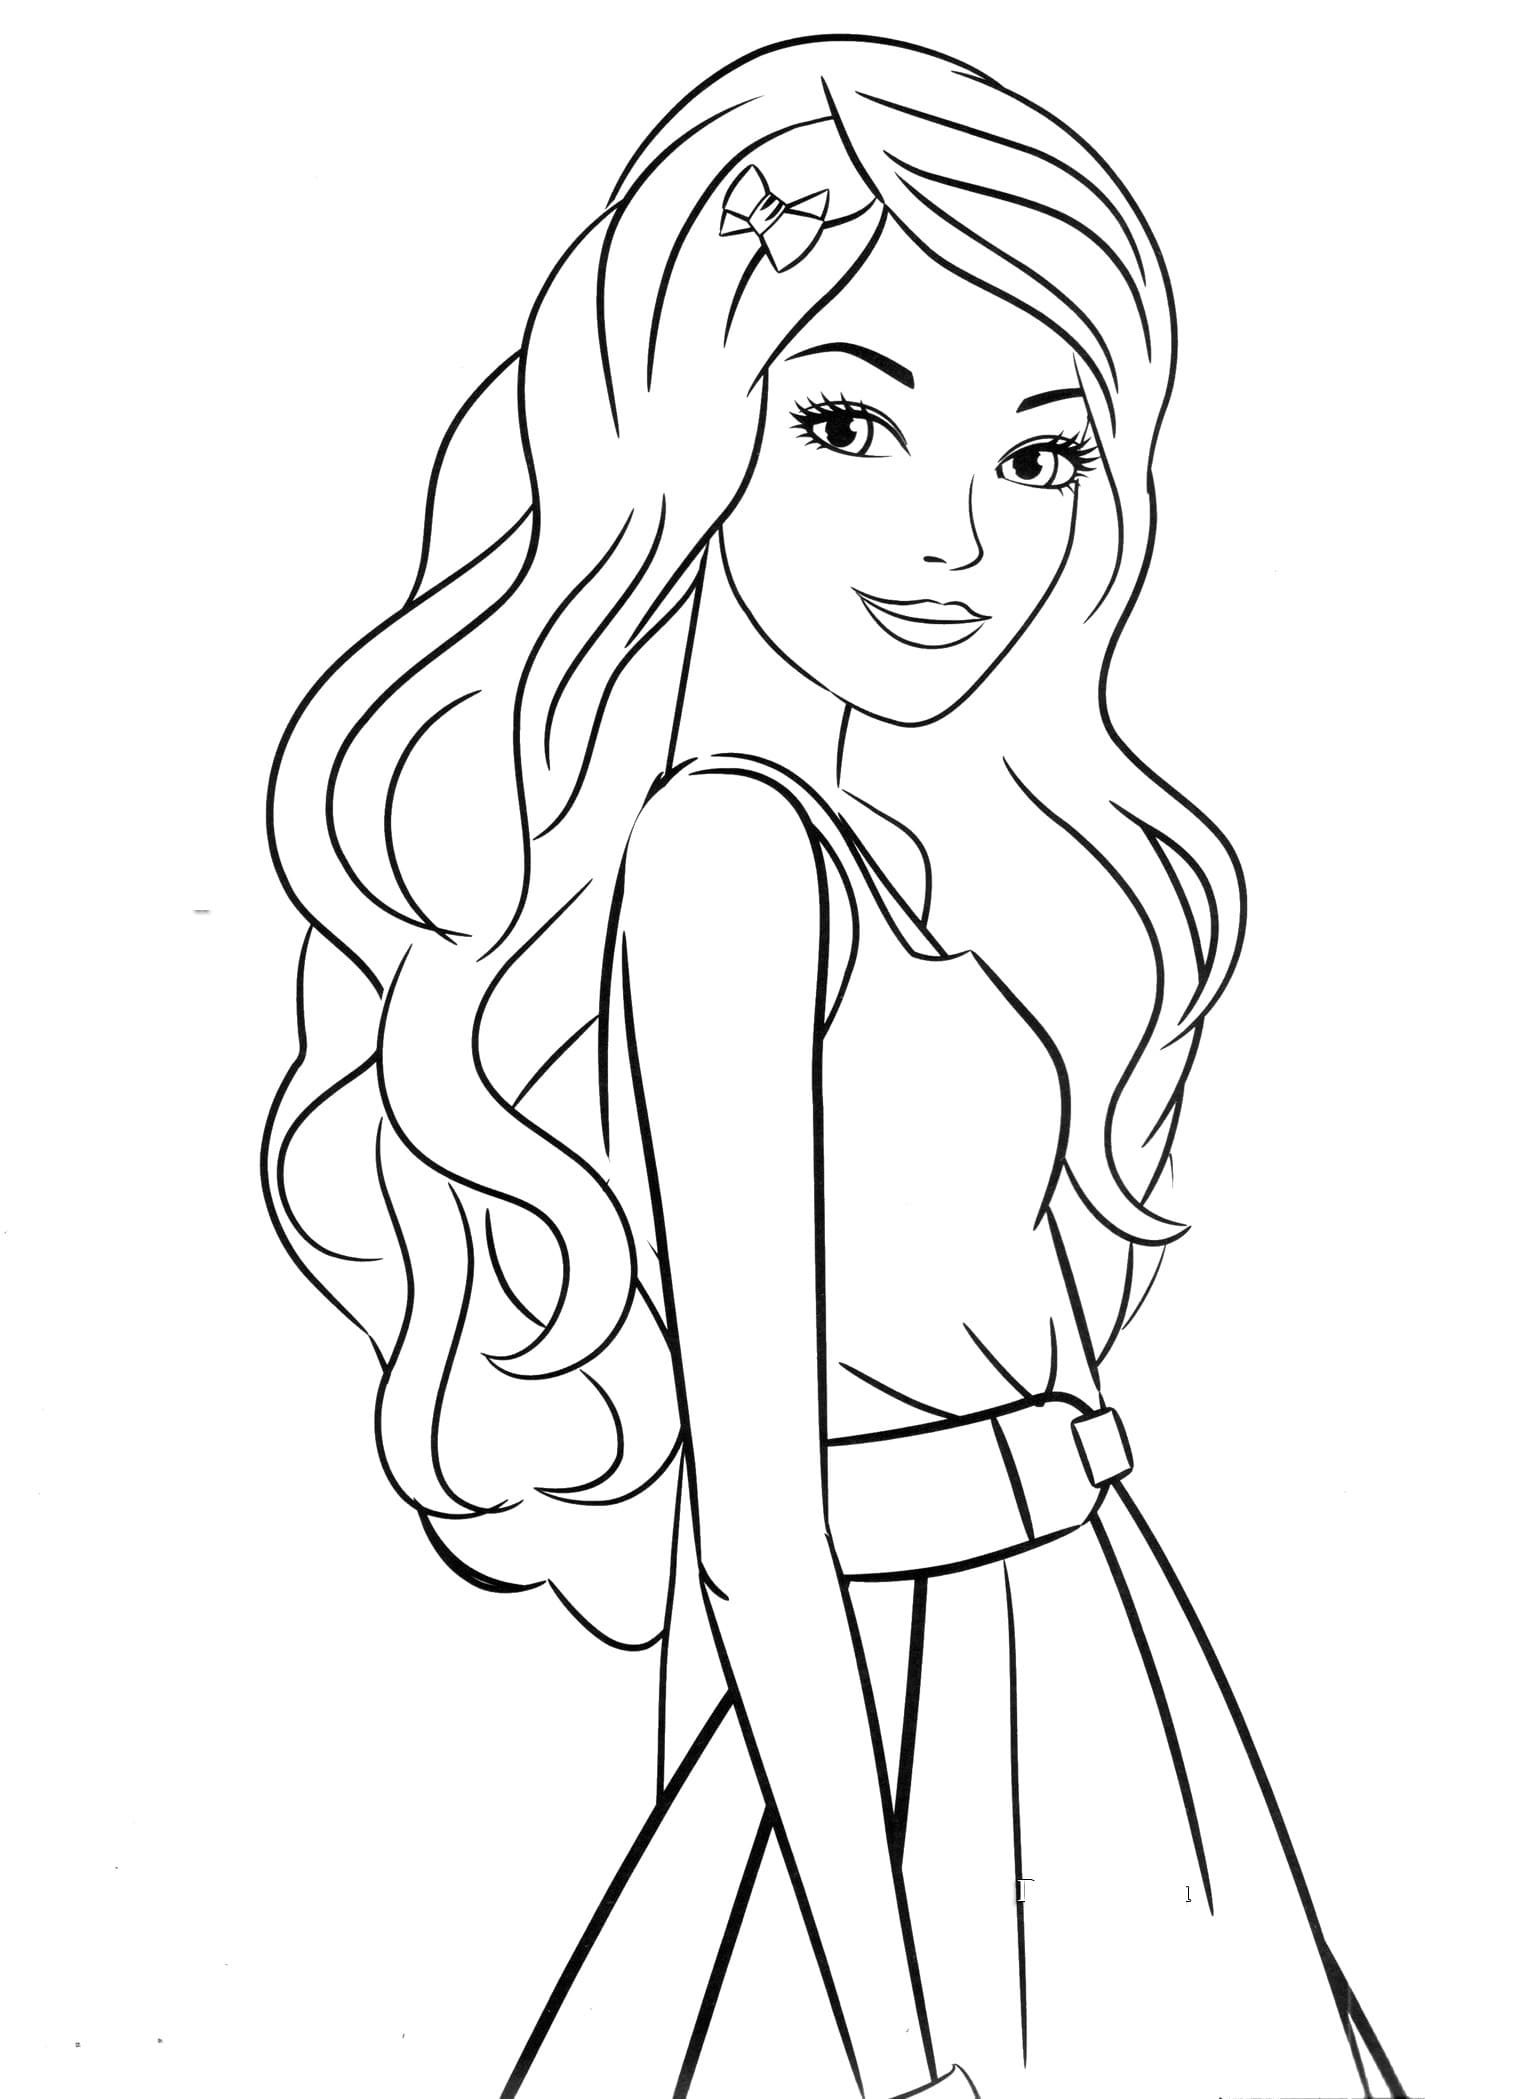 Free collection of people coloring pages for kids